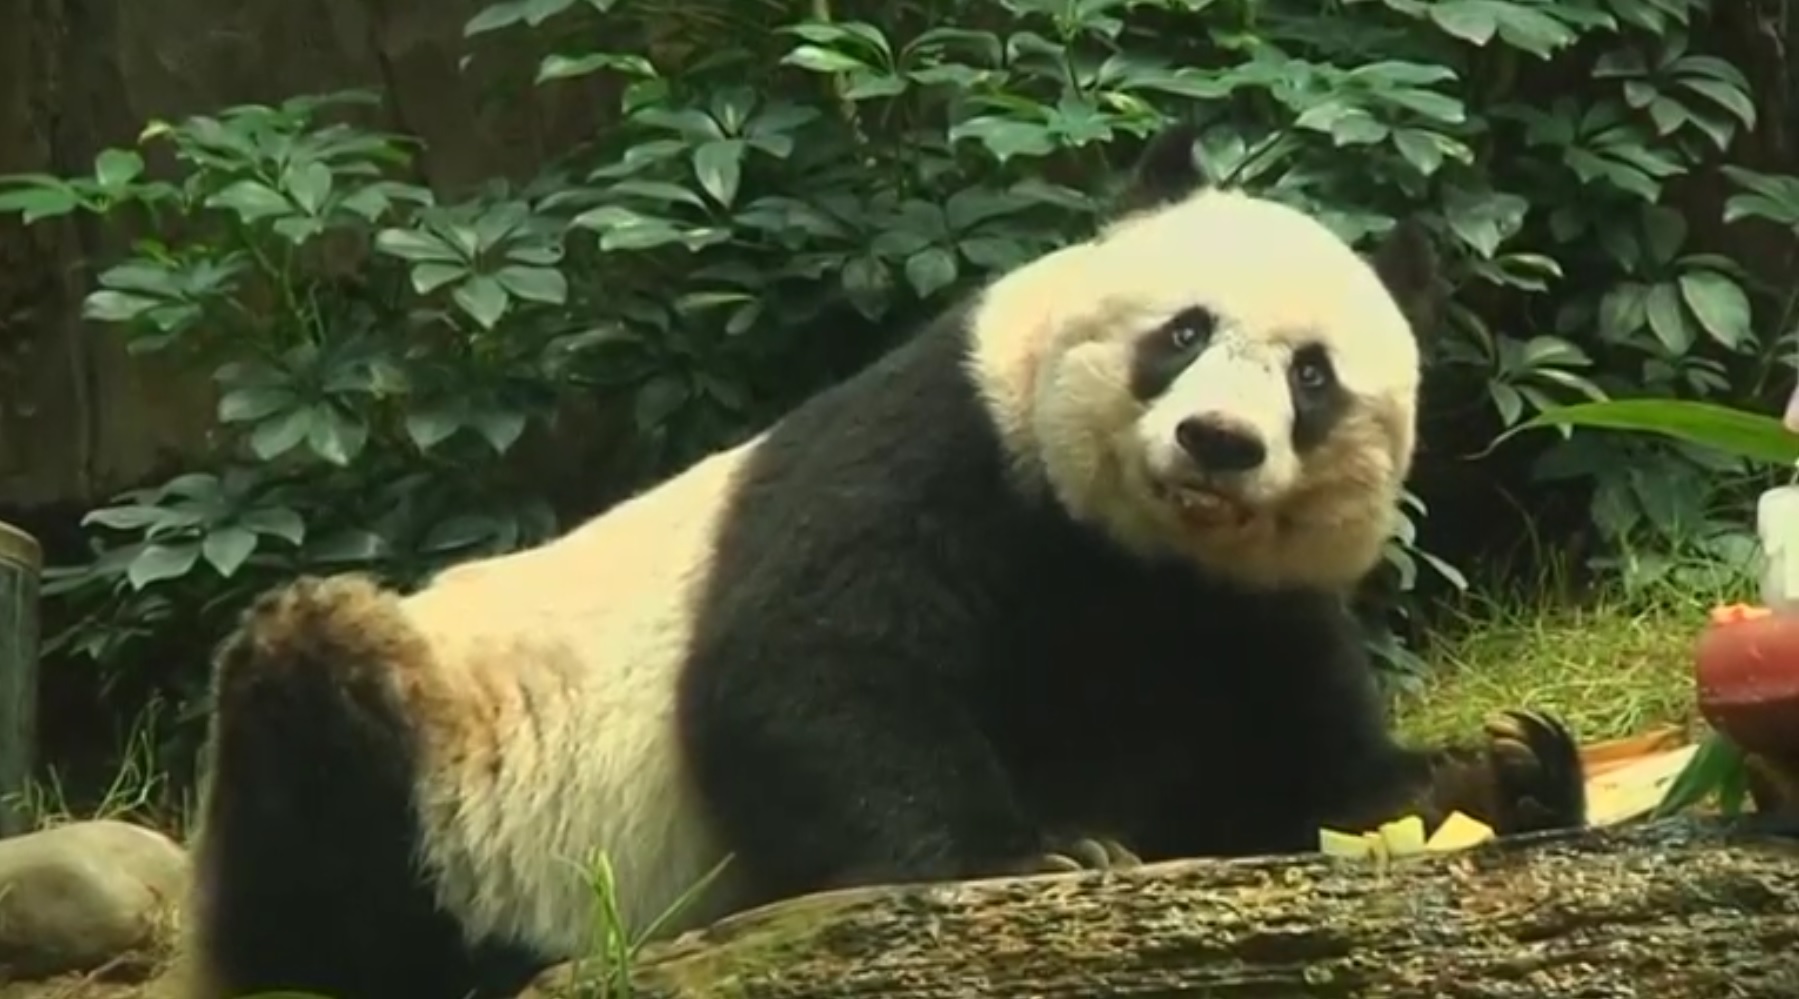 World's oldest giant panda in captivity dies in Hong Kong age 38. (Photo grabbed from Reuters video)